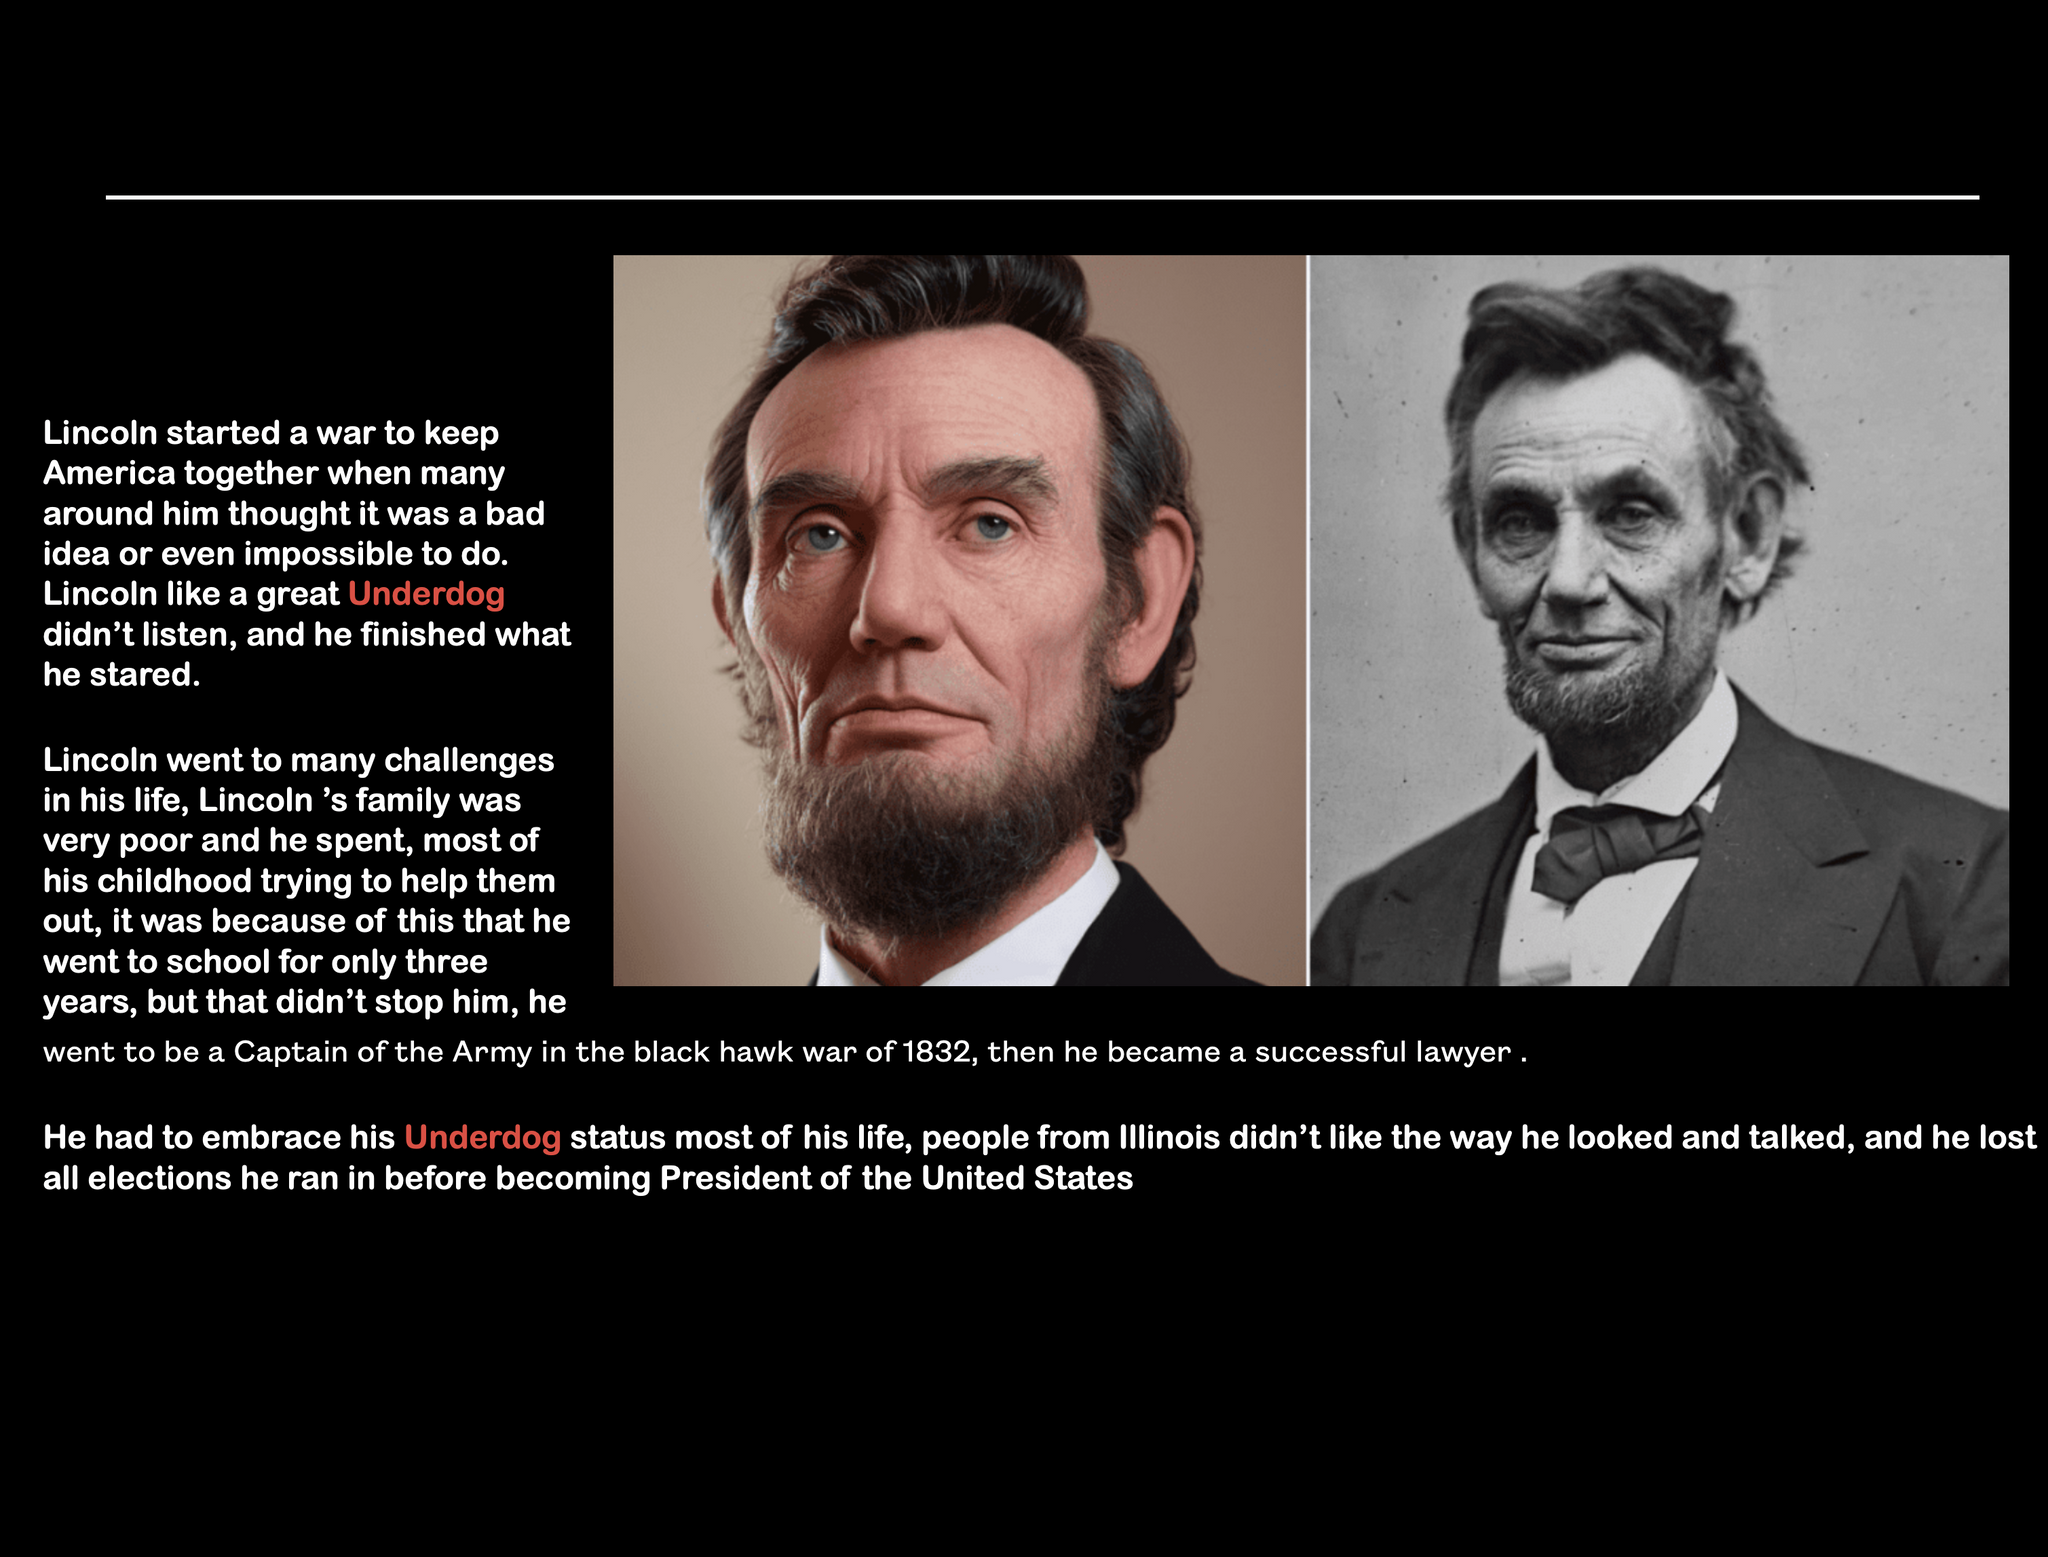 Abraham Lincoln  one of the greatest underdogz in history